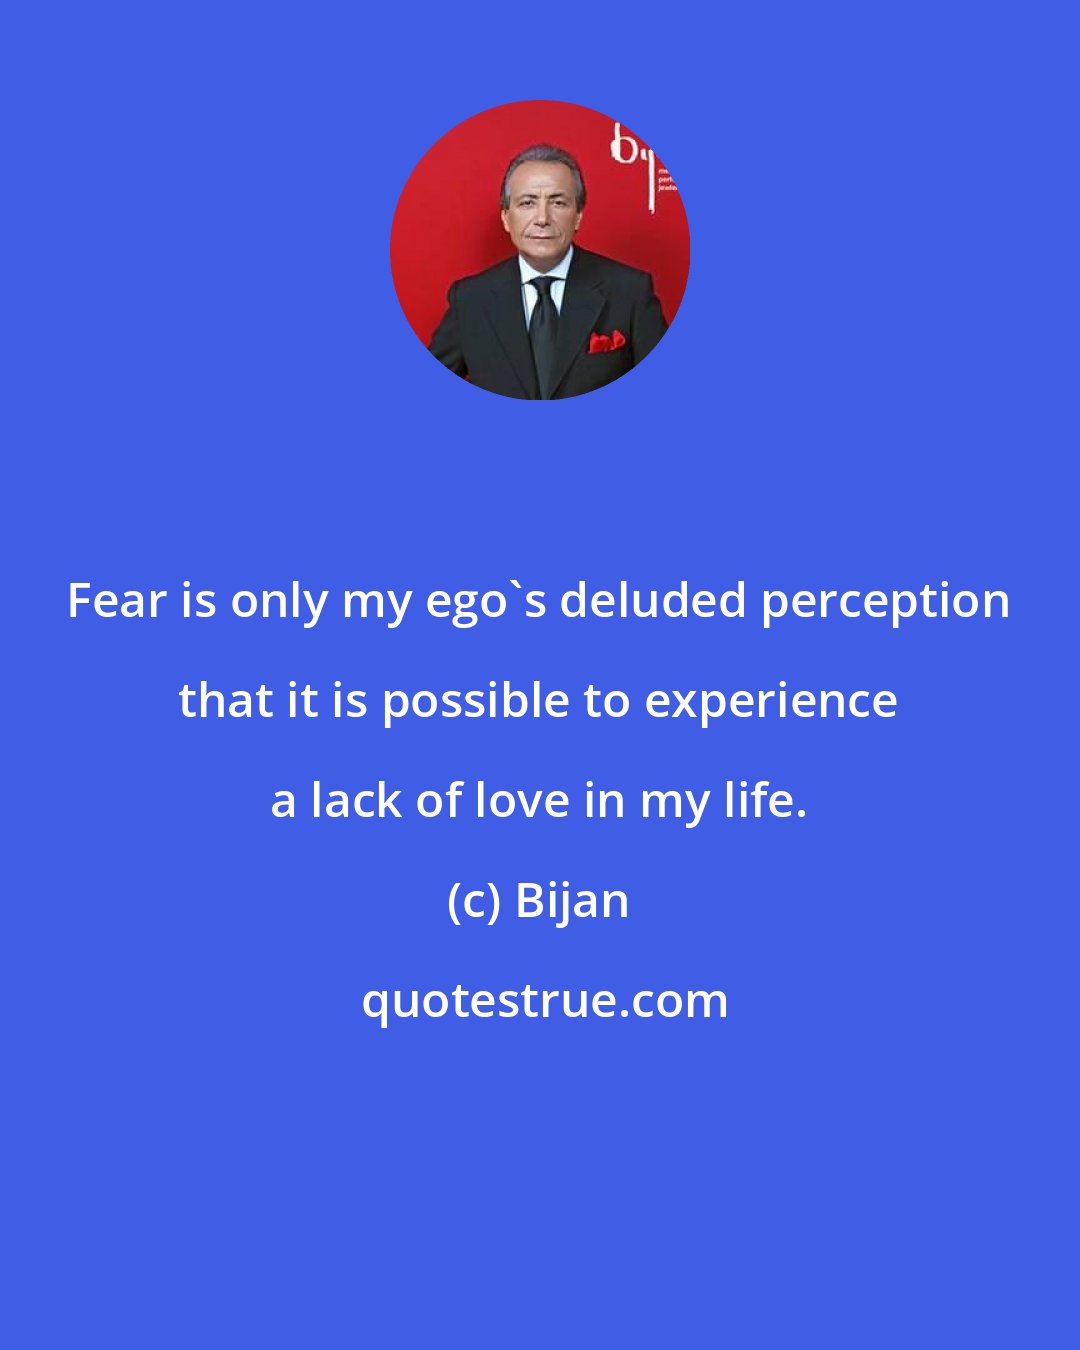 Bijan: Fear is only my ego's deluded perception that it is possible to experience a lack of love in my life.